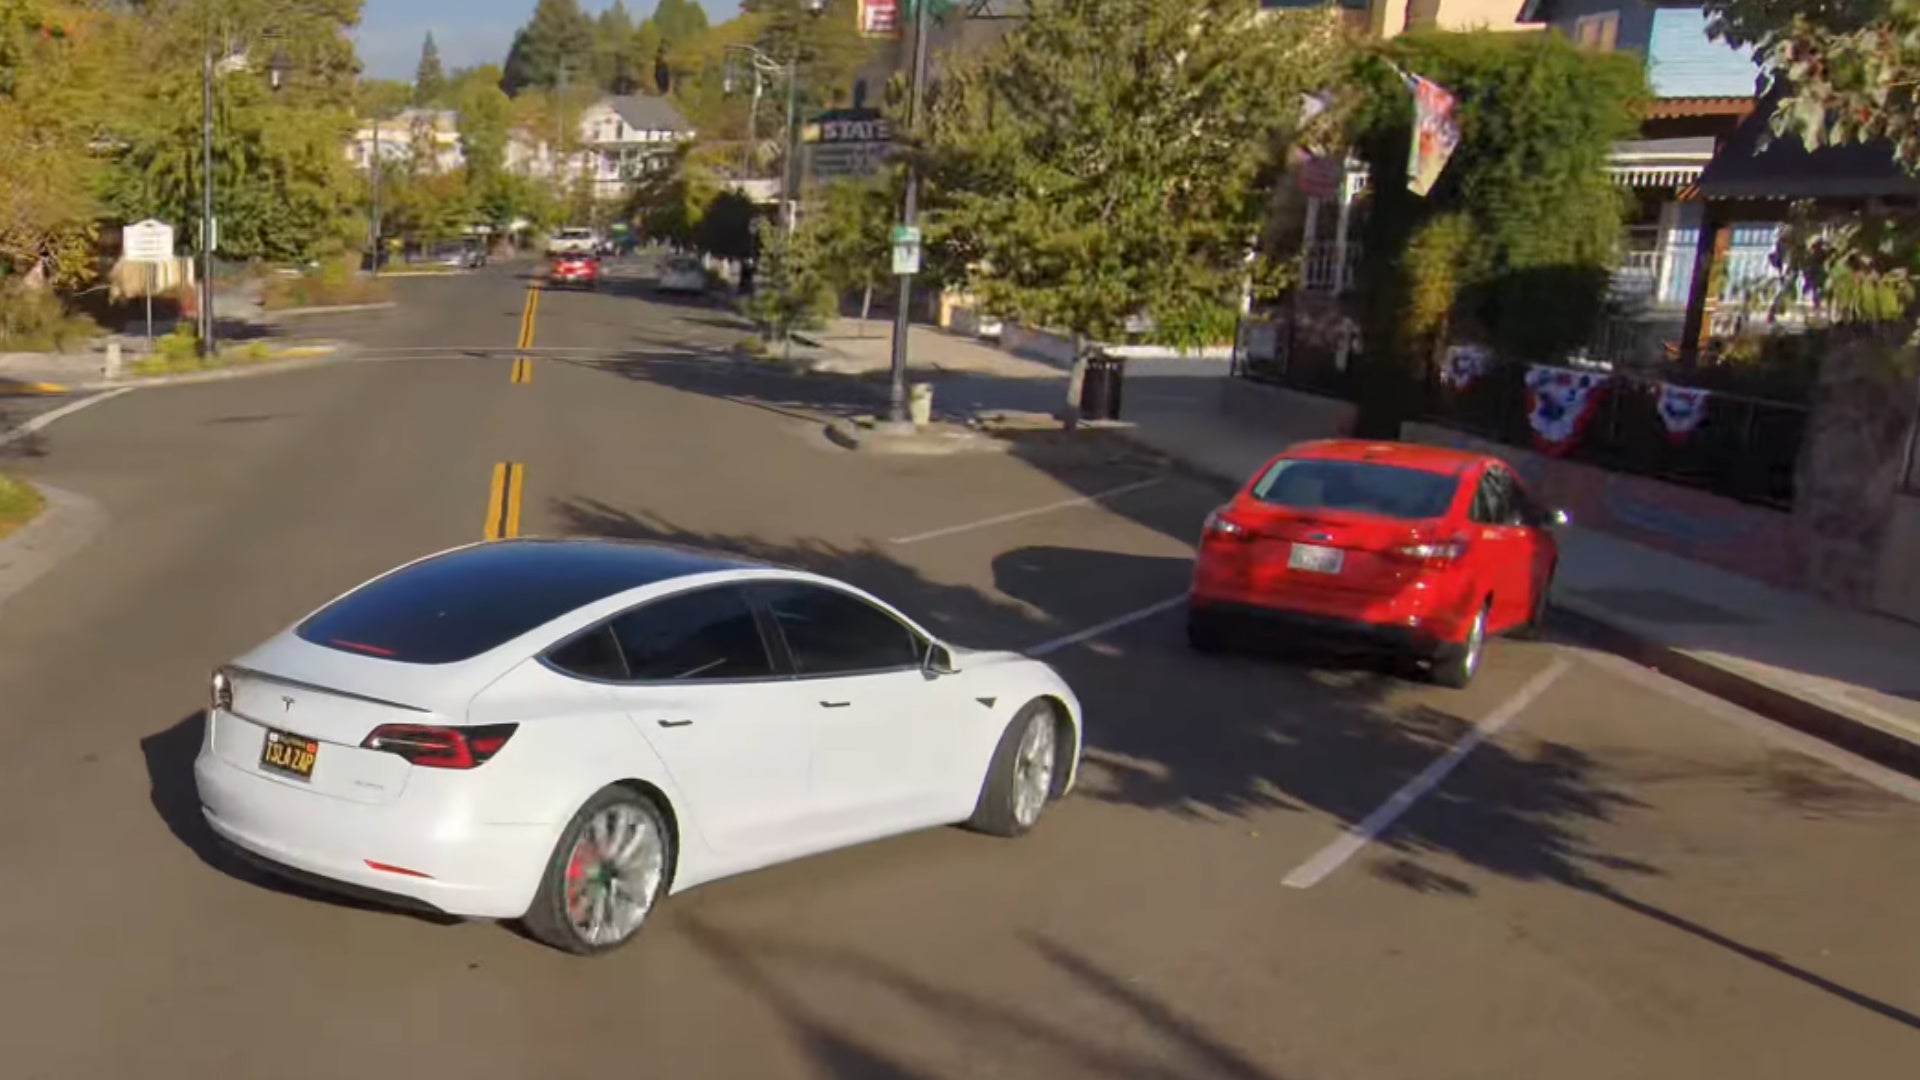 Tesla’s ‘Full Self Driving’ Beta Tech Nearly Wrecked This Model 3 Into a Parked Car